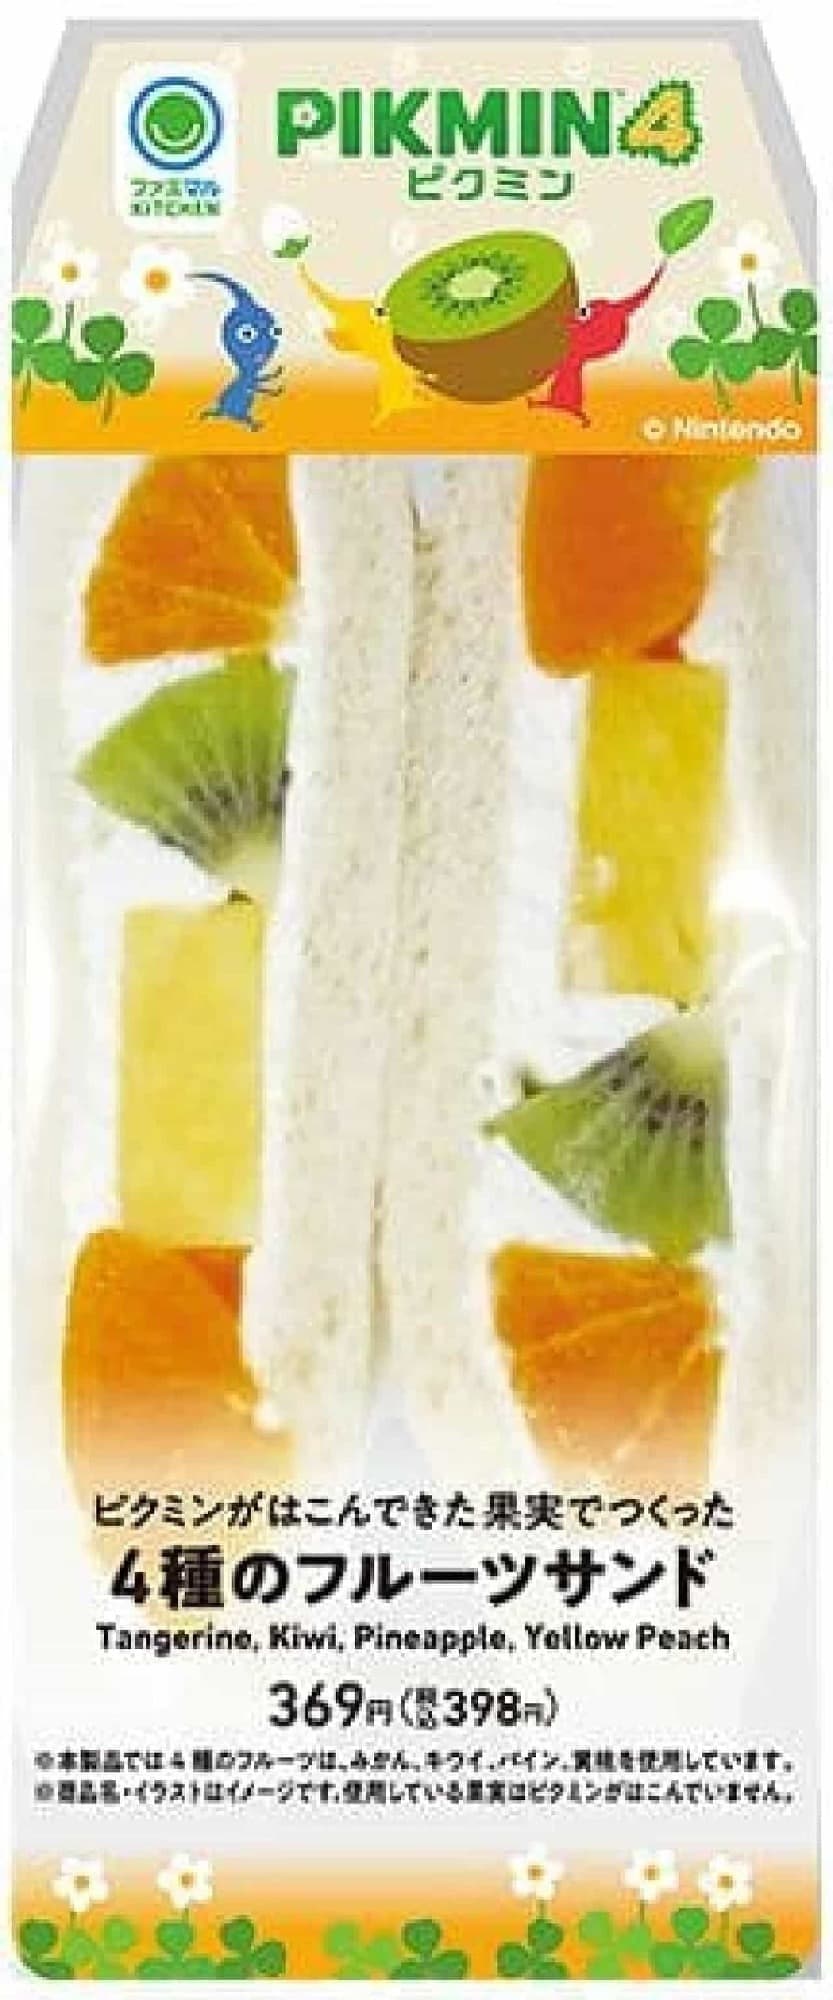 FamilyMart "Four kinds of fruit sandwiches made from fruits that pikmin have brought in".